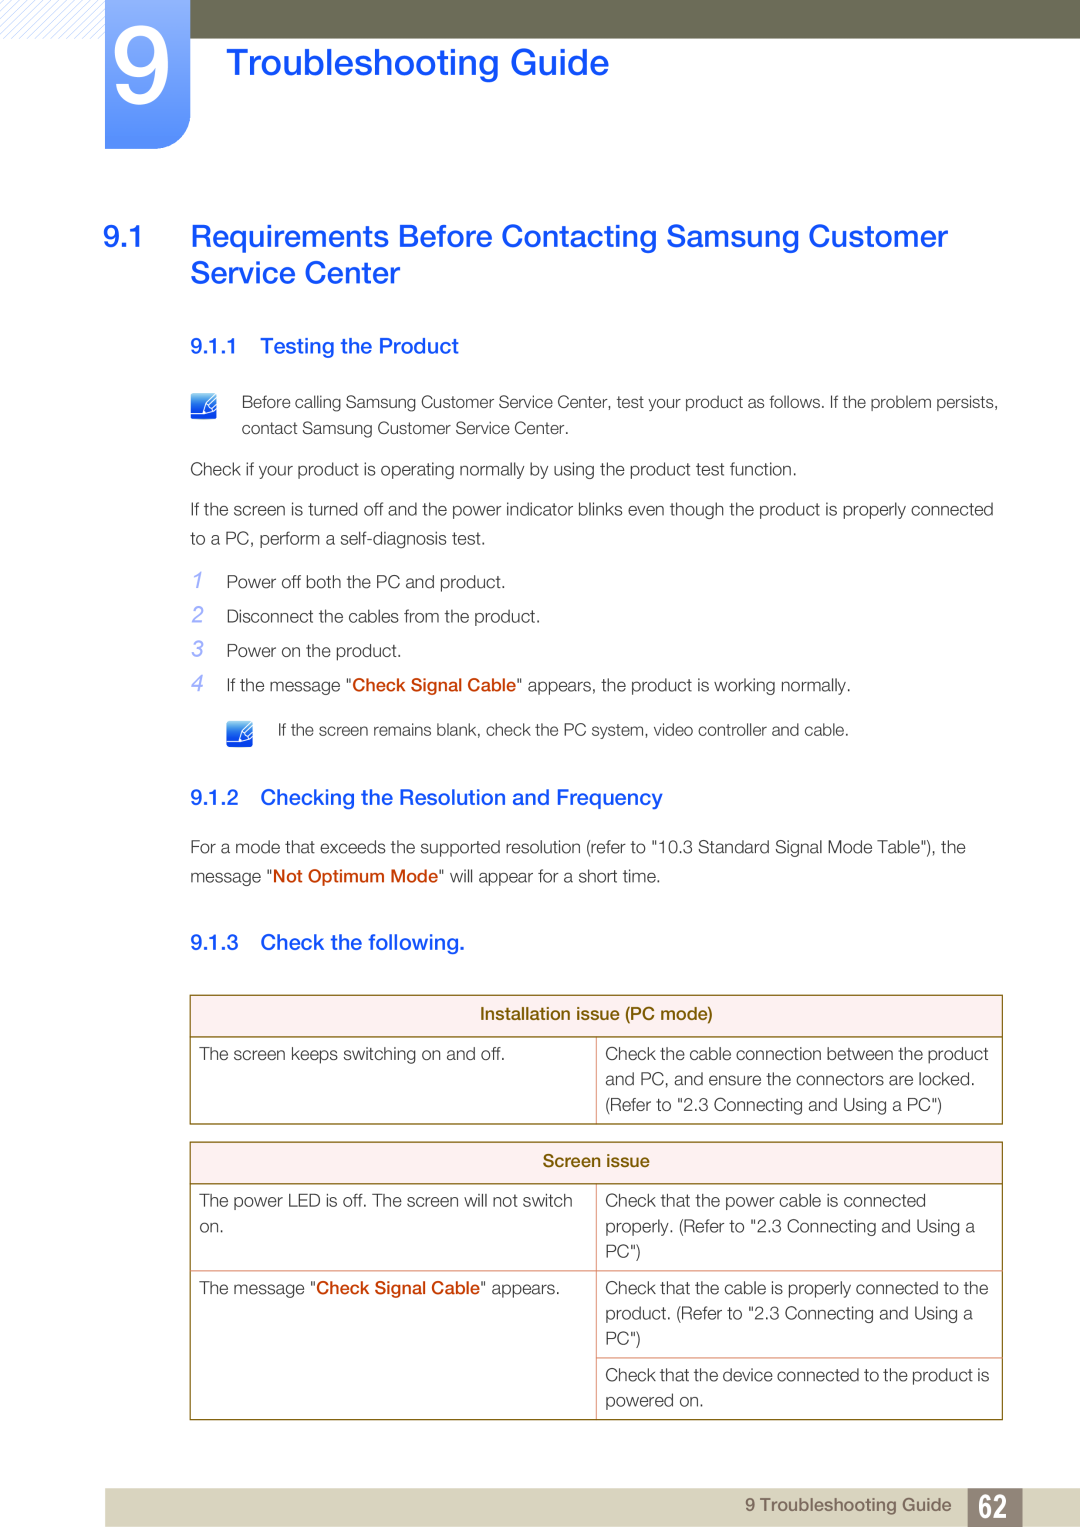 Samsung LS19B310ES/SM Troubleshooting Guide, Requirements Before Contacting Samsung Customer Service Center, Screen issue 